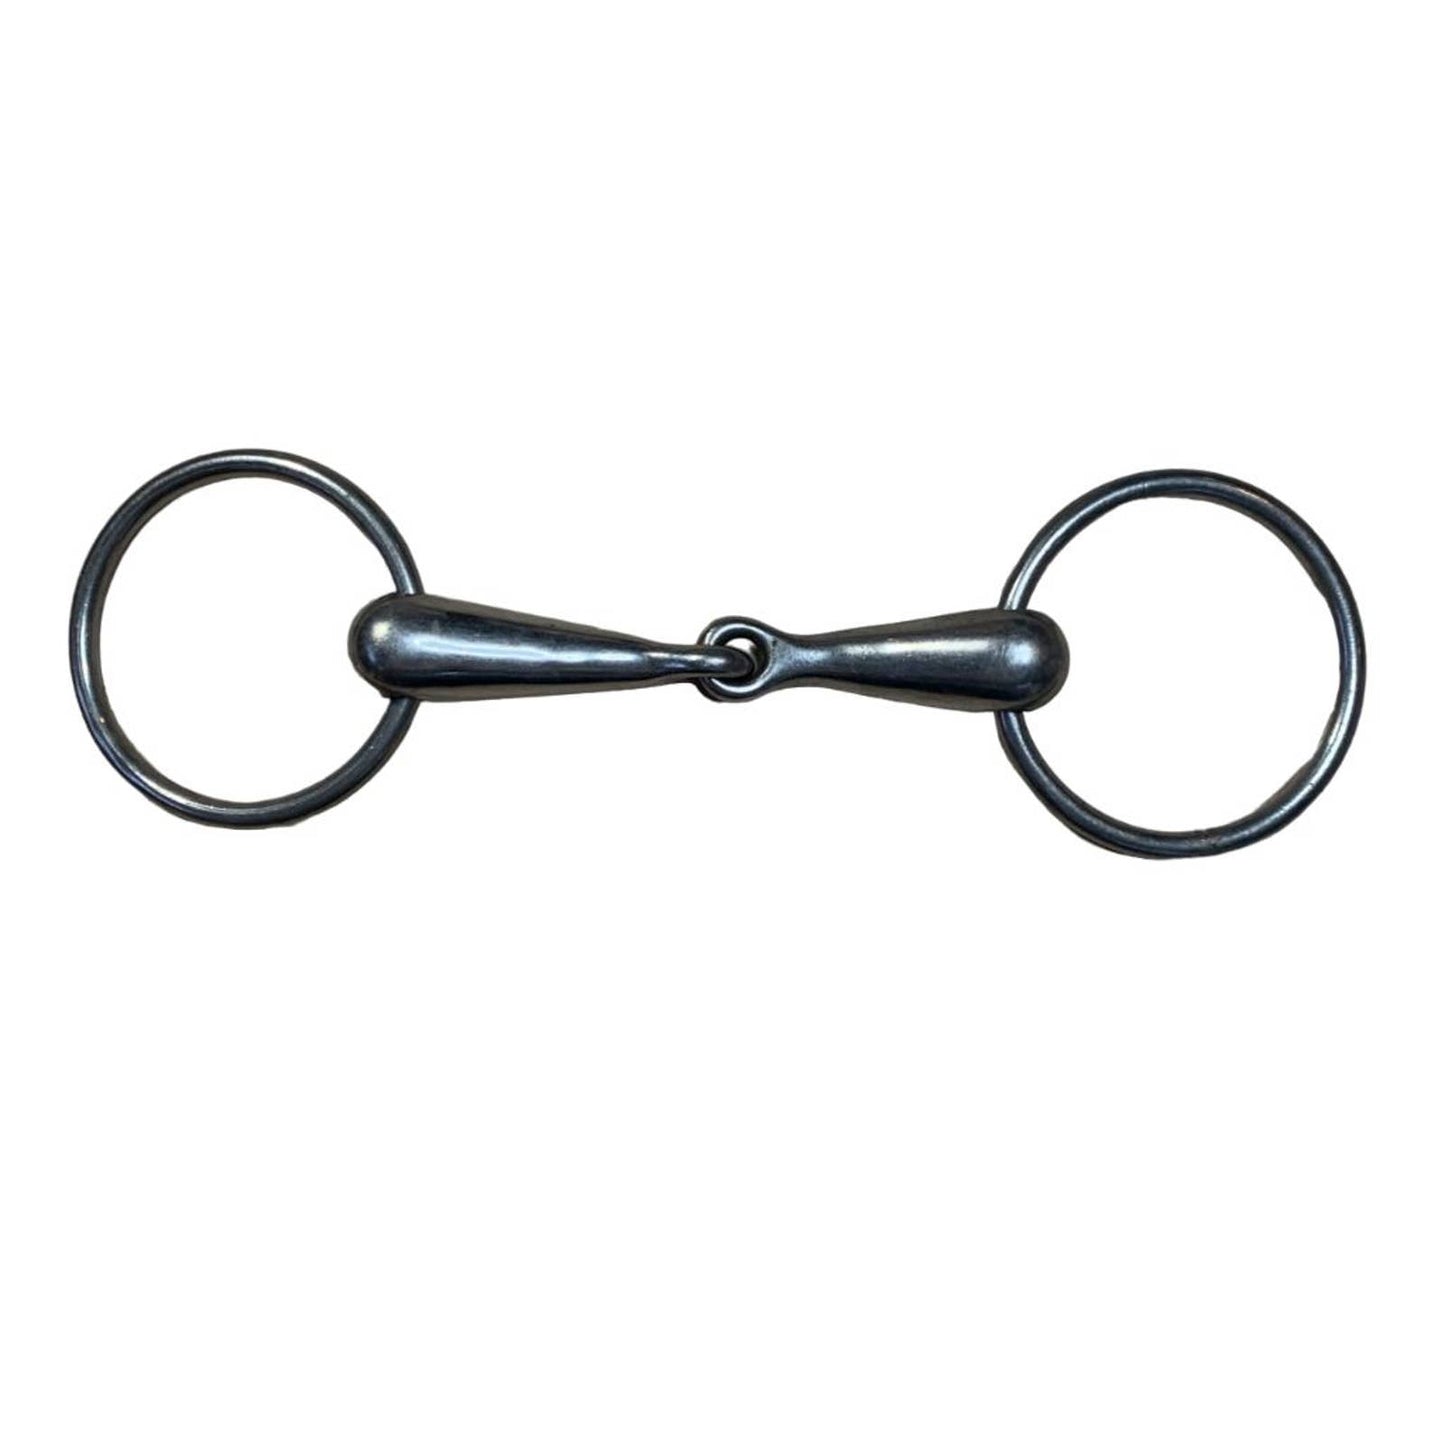 Hollow Loose-Ring Snaffle in Stainless Steel - 5"